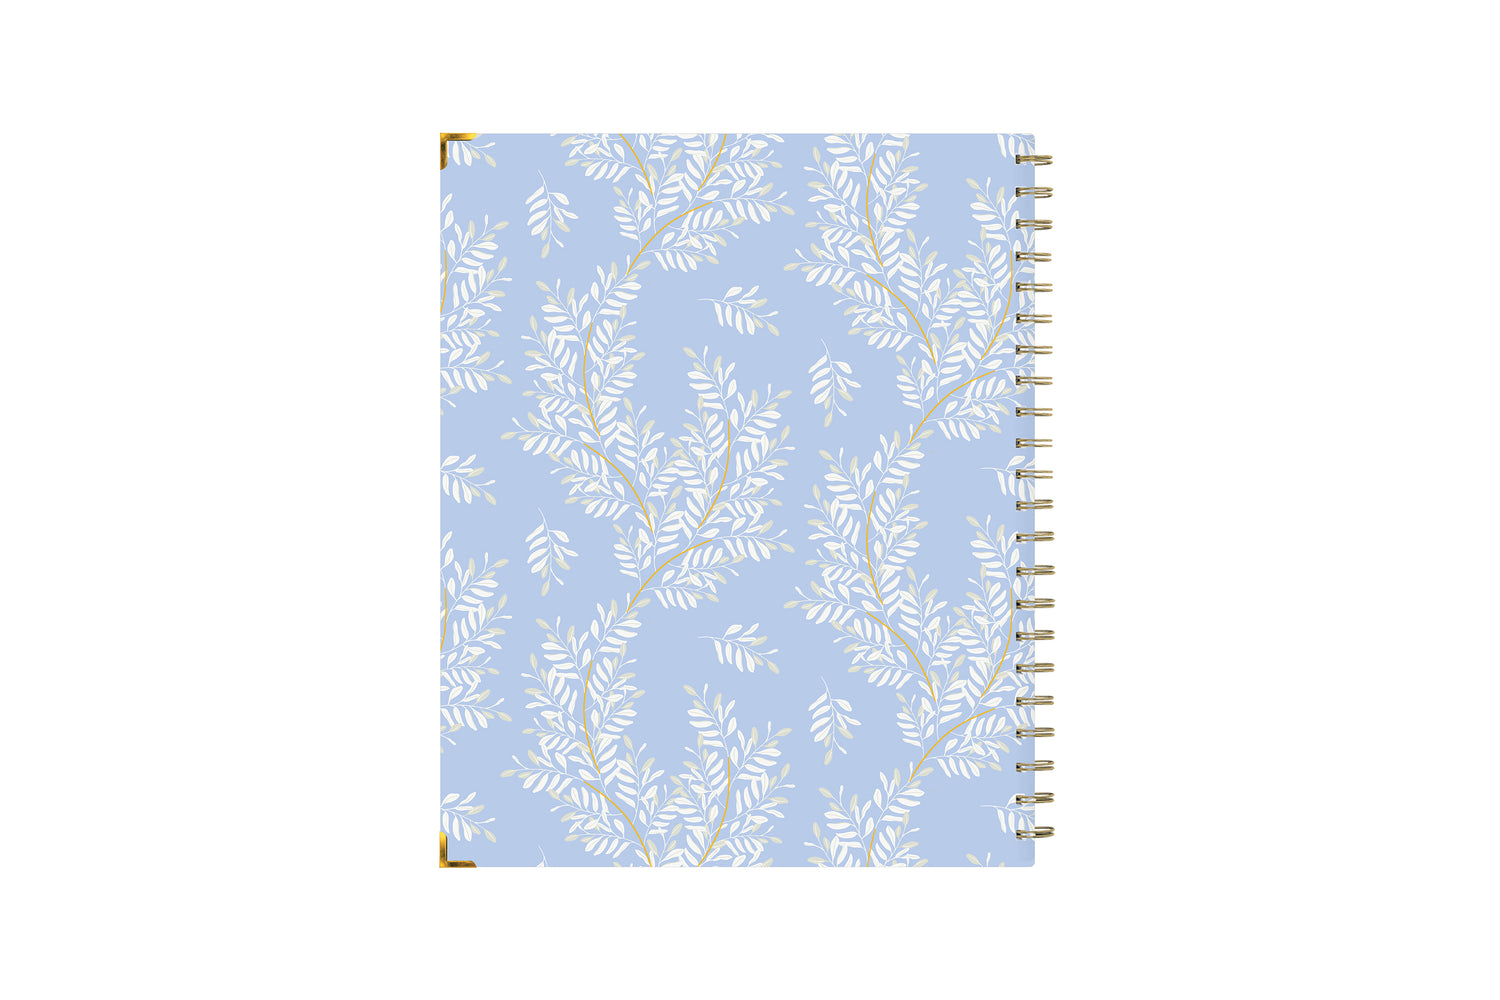 2023-2024 8.5x11 academic plammer featuring gold wire binding, gold corner tips, floral design